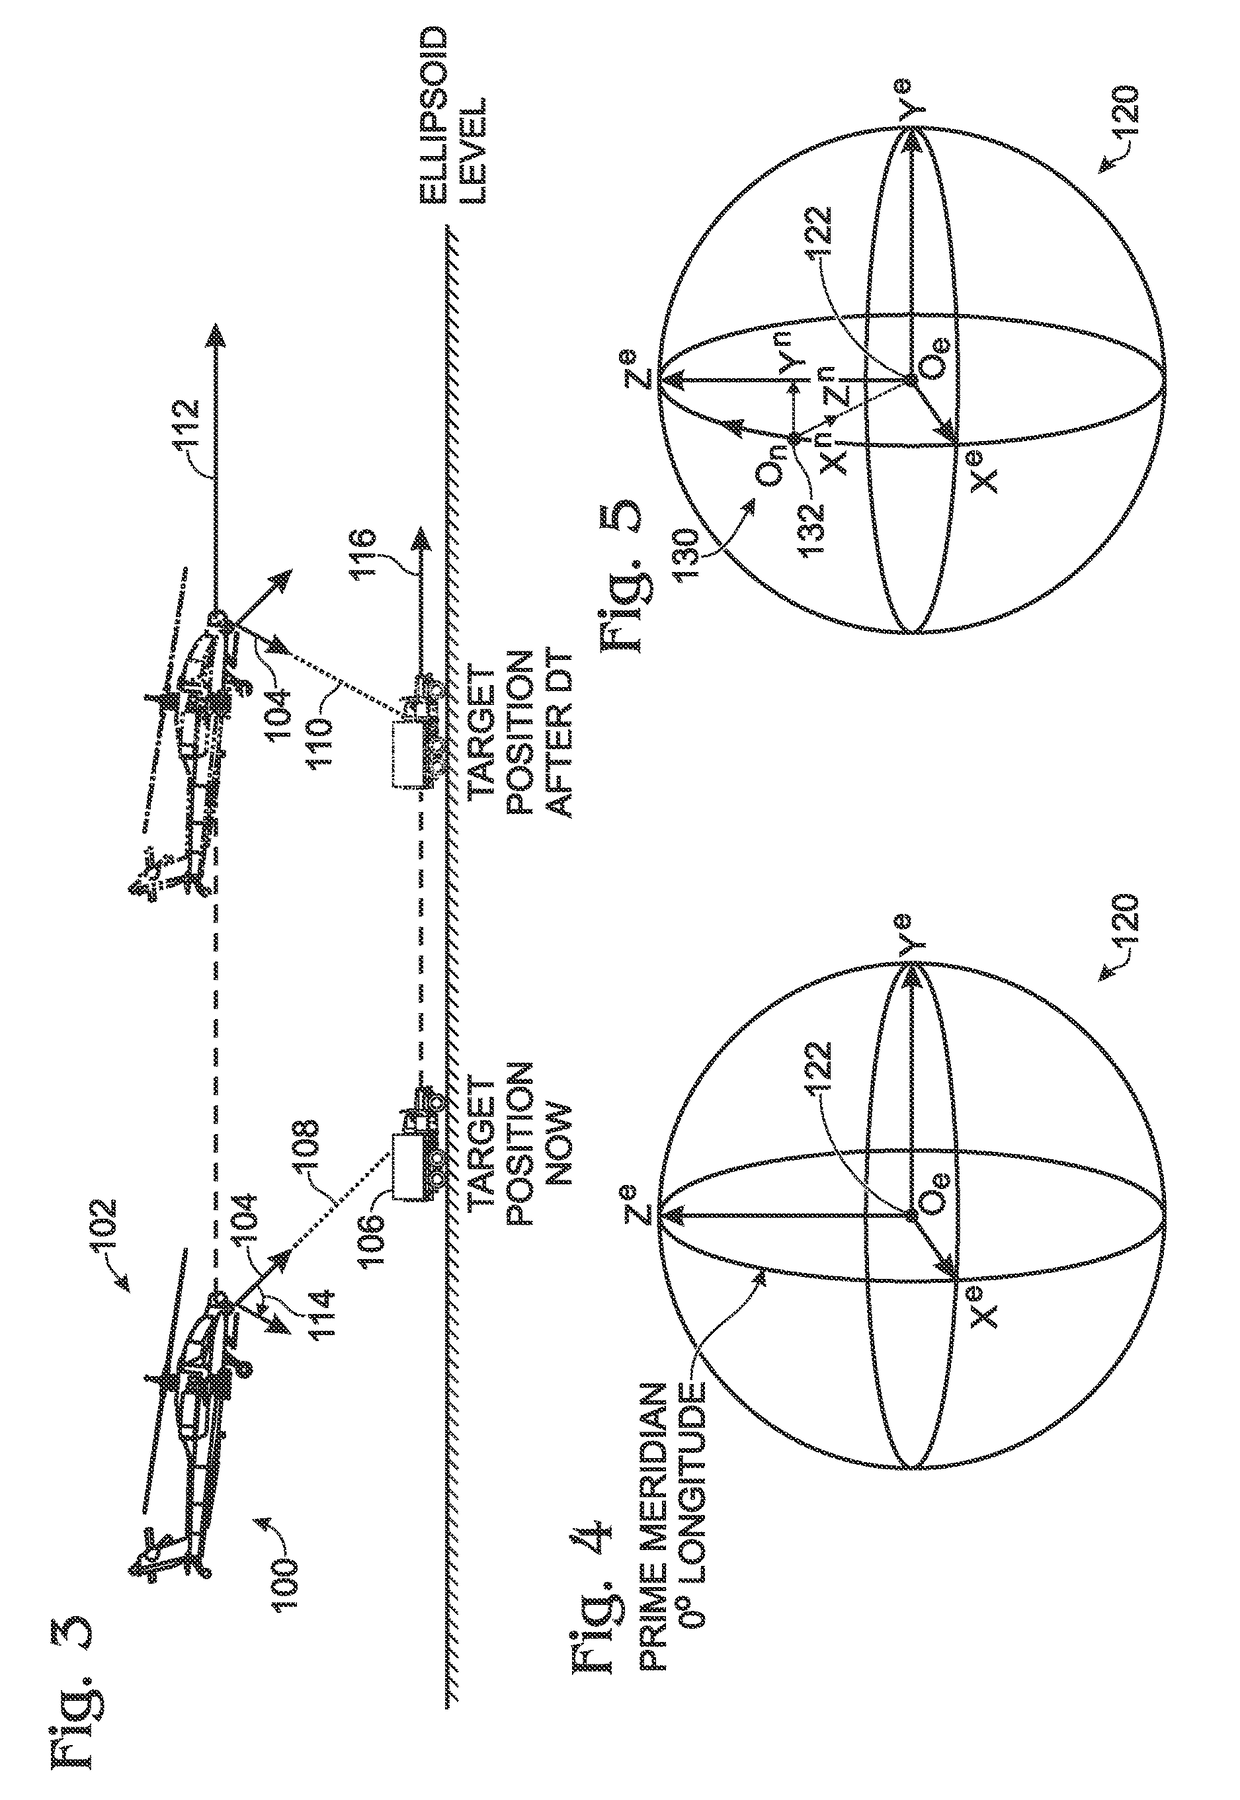 Gimbal positioning with target velocity compensation